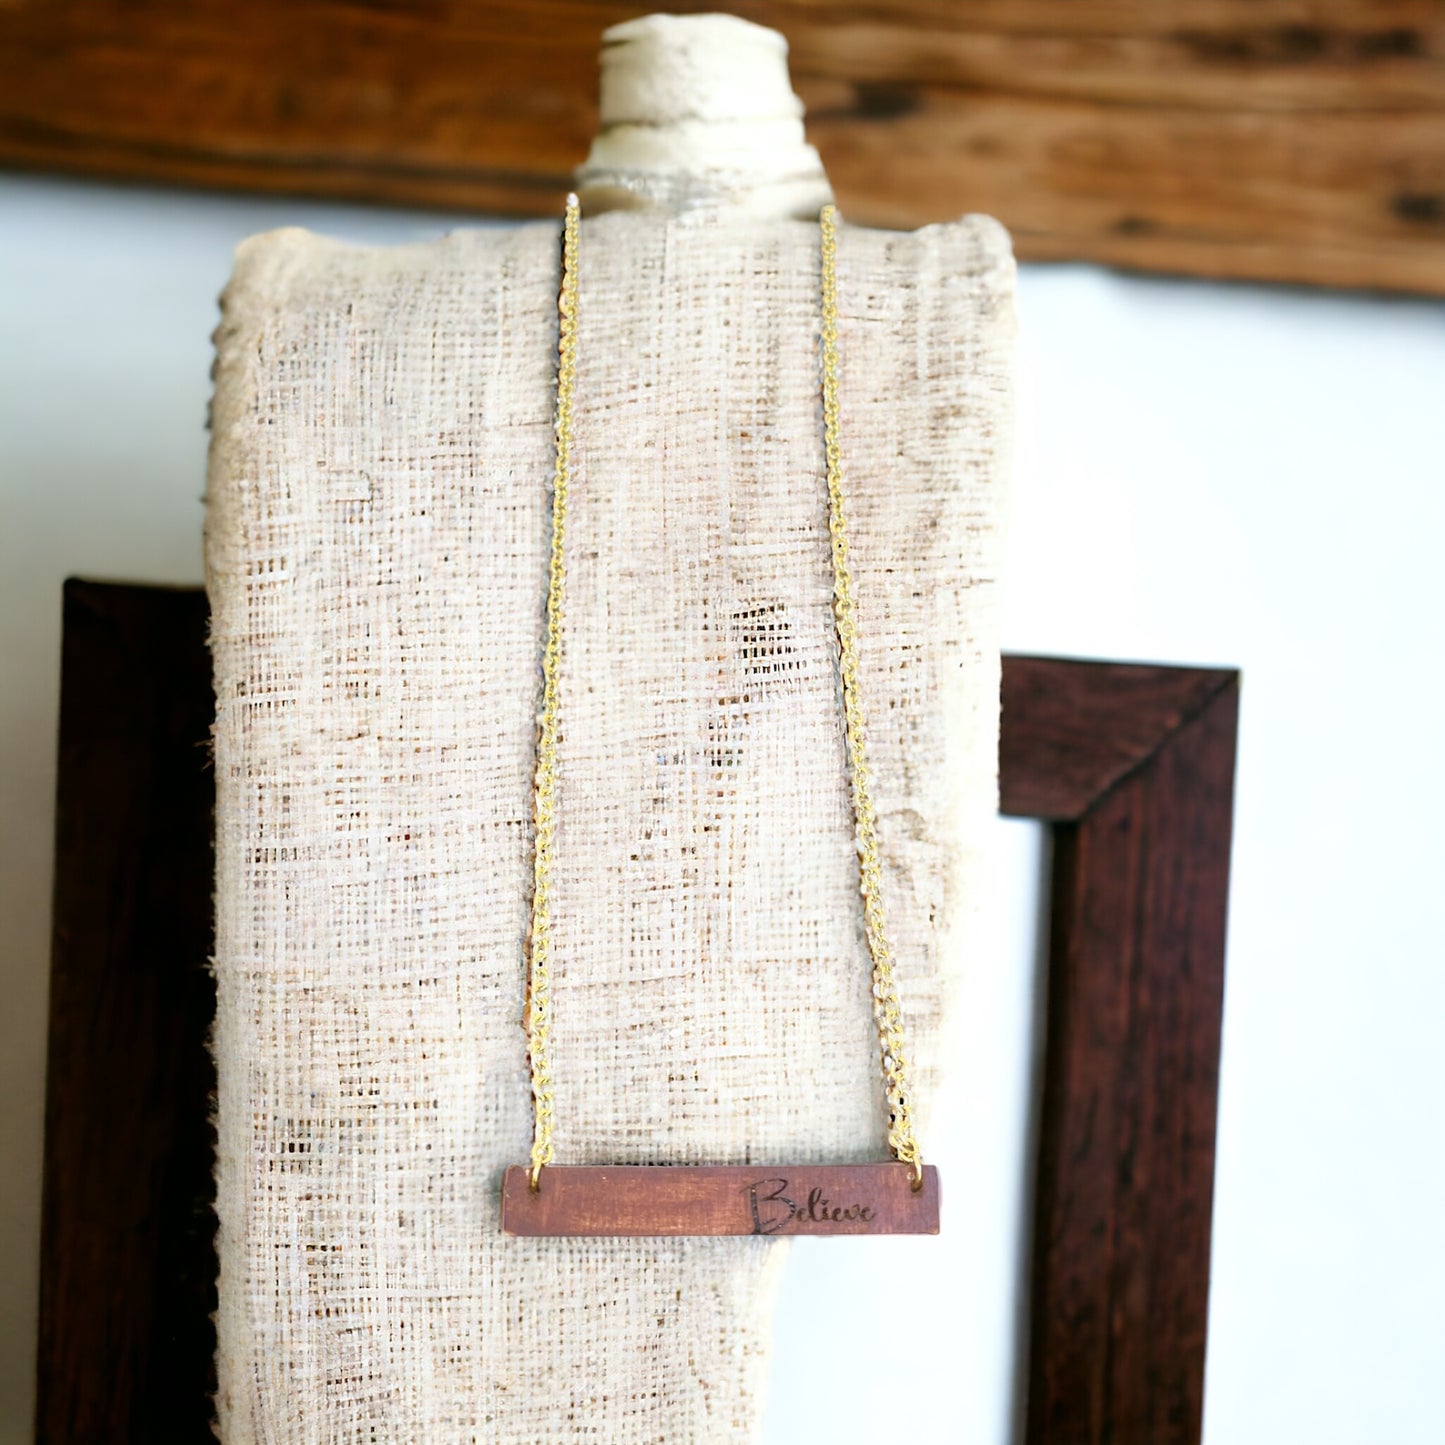 Wood Bar "Believe" Necklace w/Gold Chain